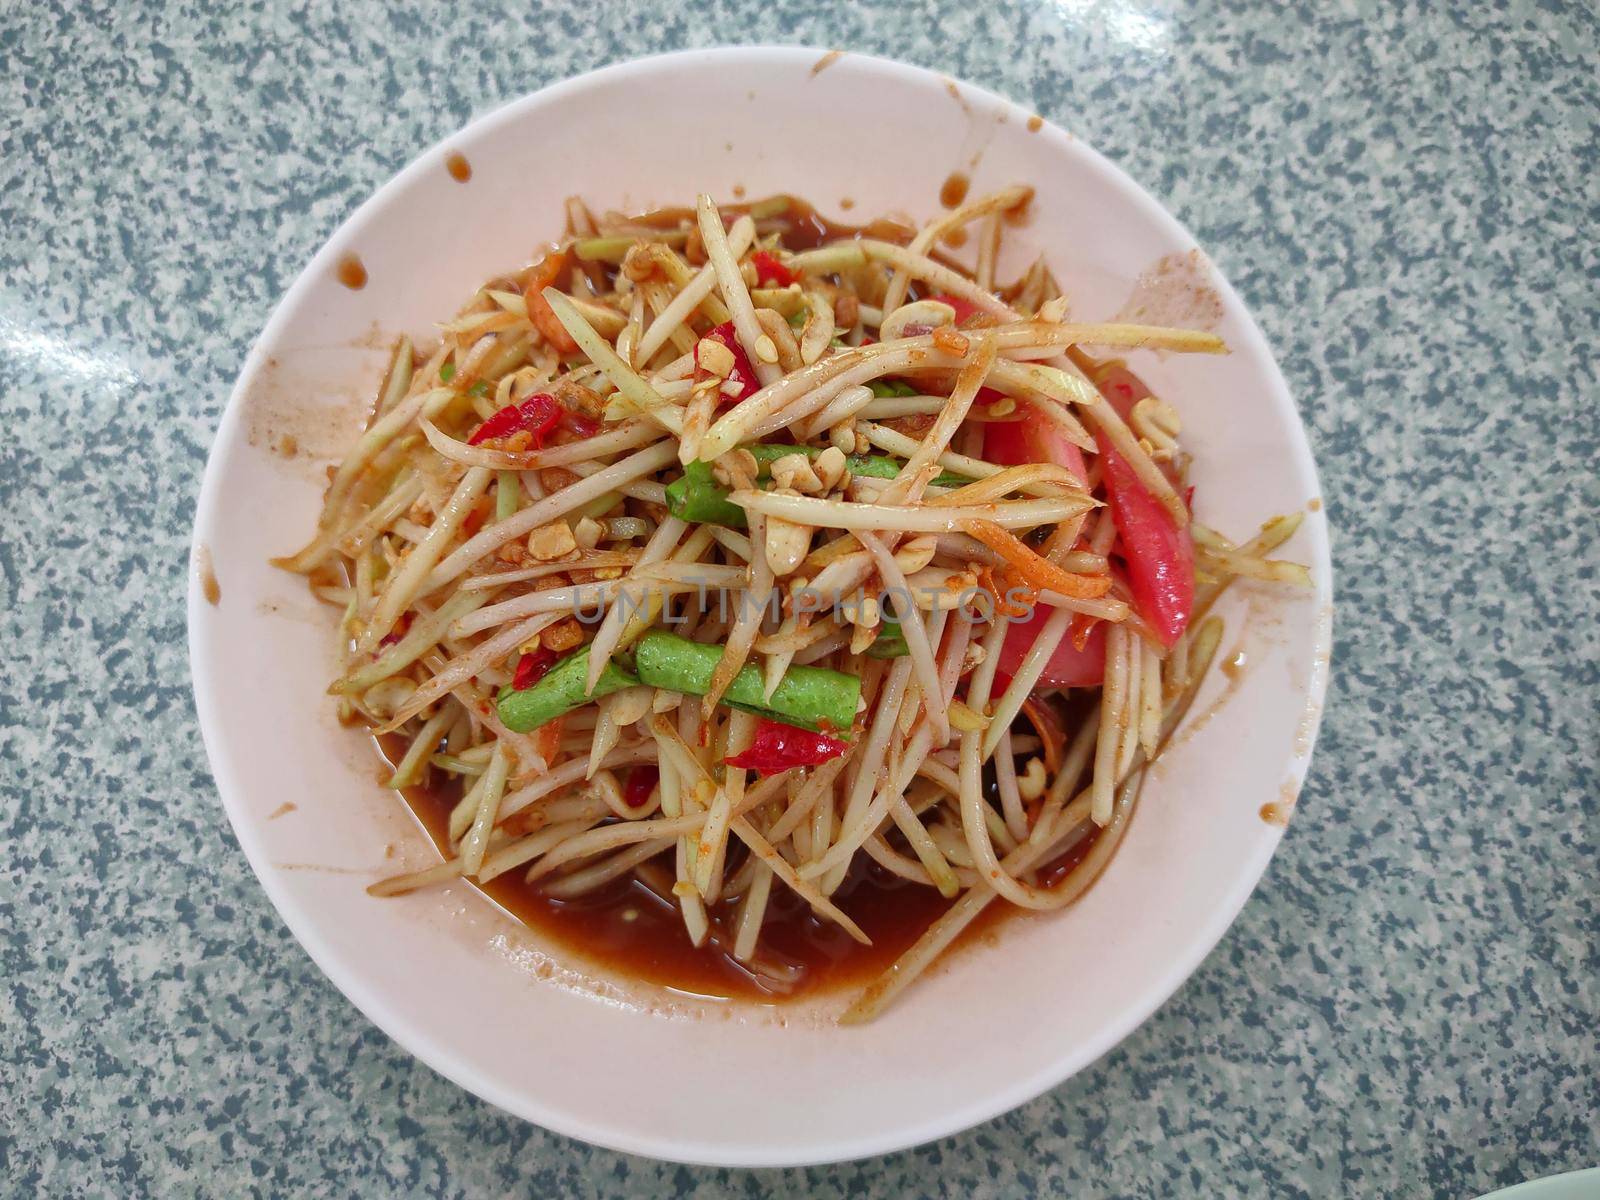 The Famous Thai food, papaya salad or what we called "Somtum" in Thai, Top view